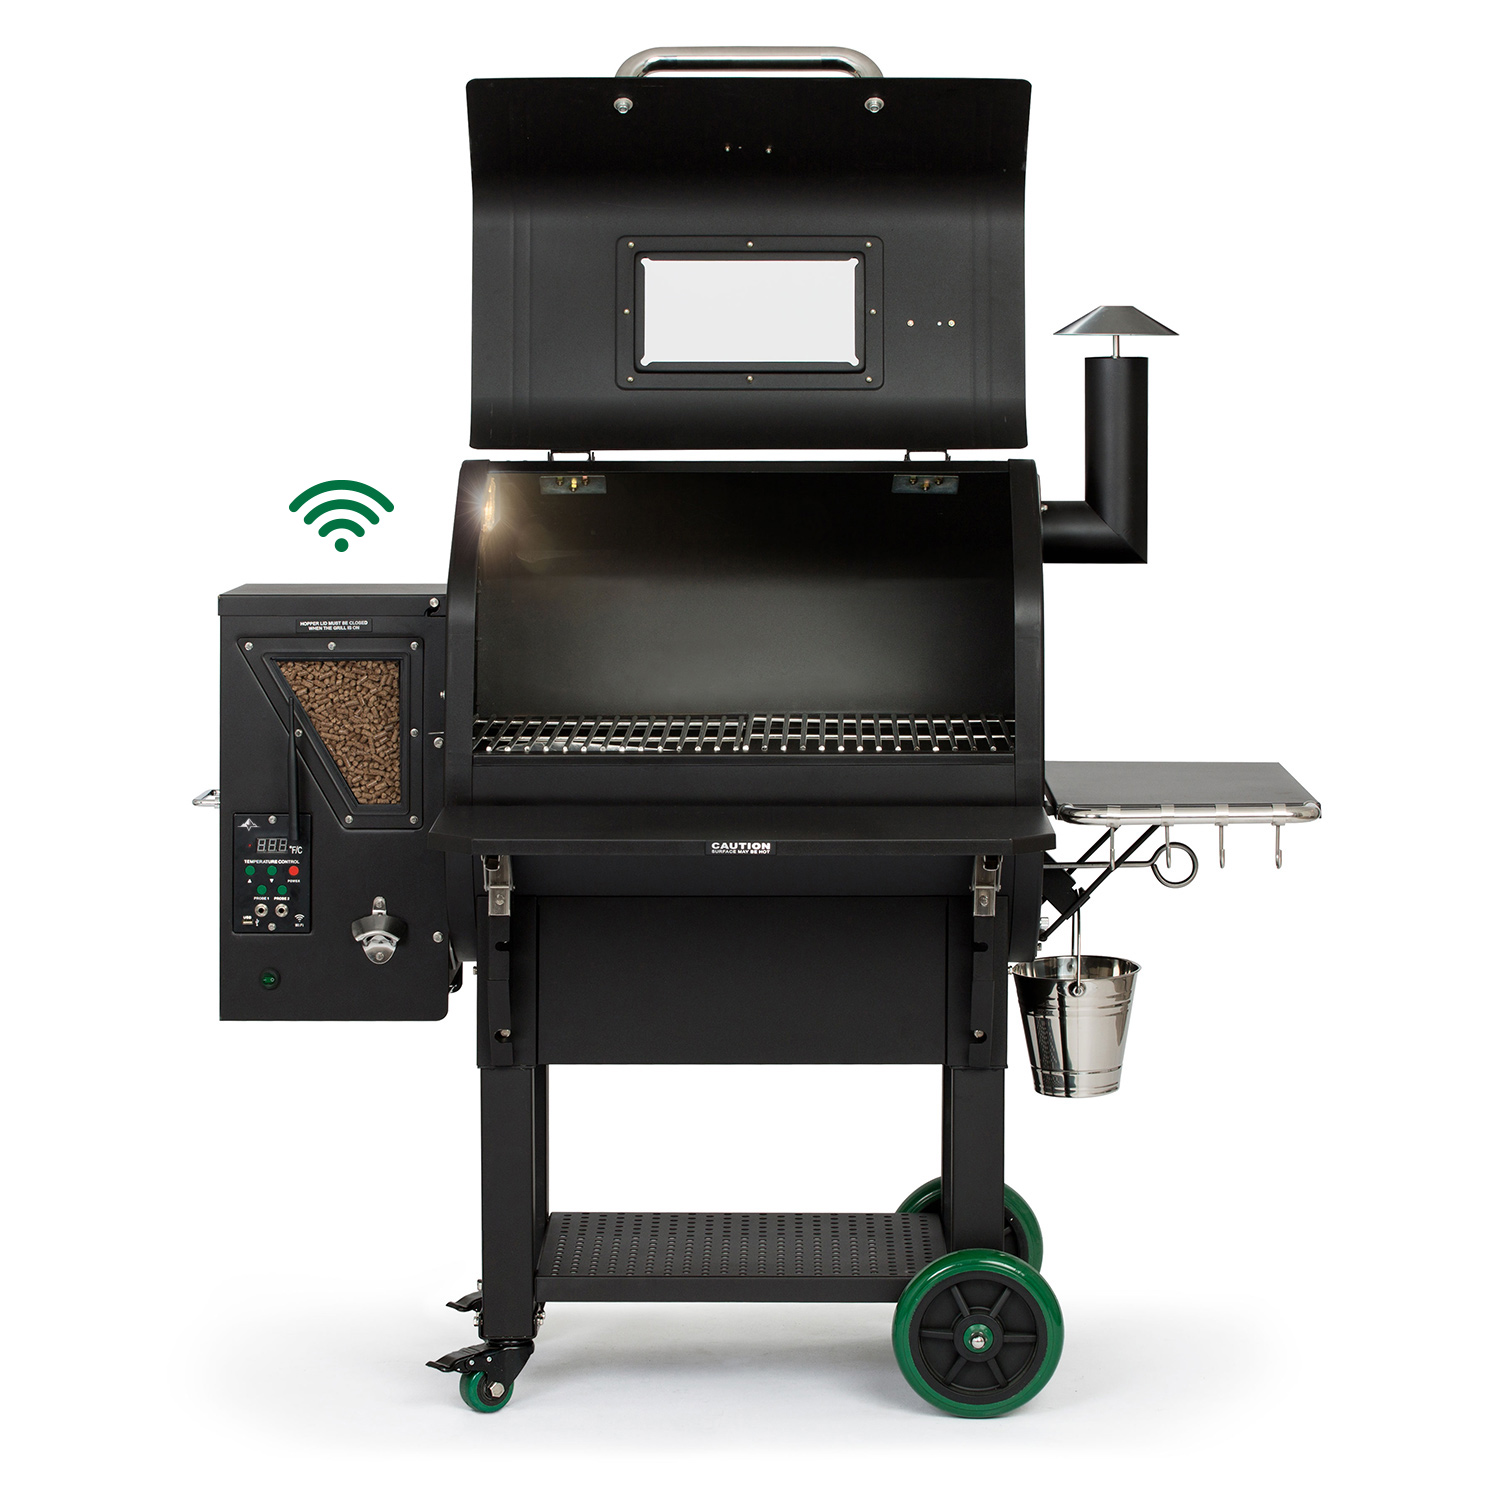 Product GMG.LEDGEWIFIBLACK: GMG LEDGE WIFI PELLET GRILL BLACK- ROTISSERIE ENABLED